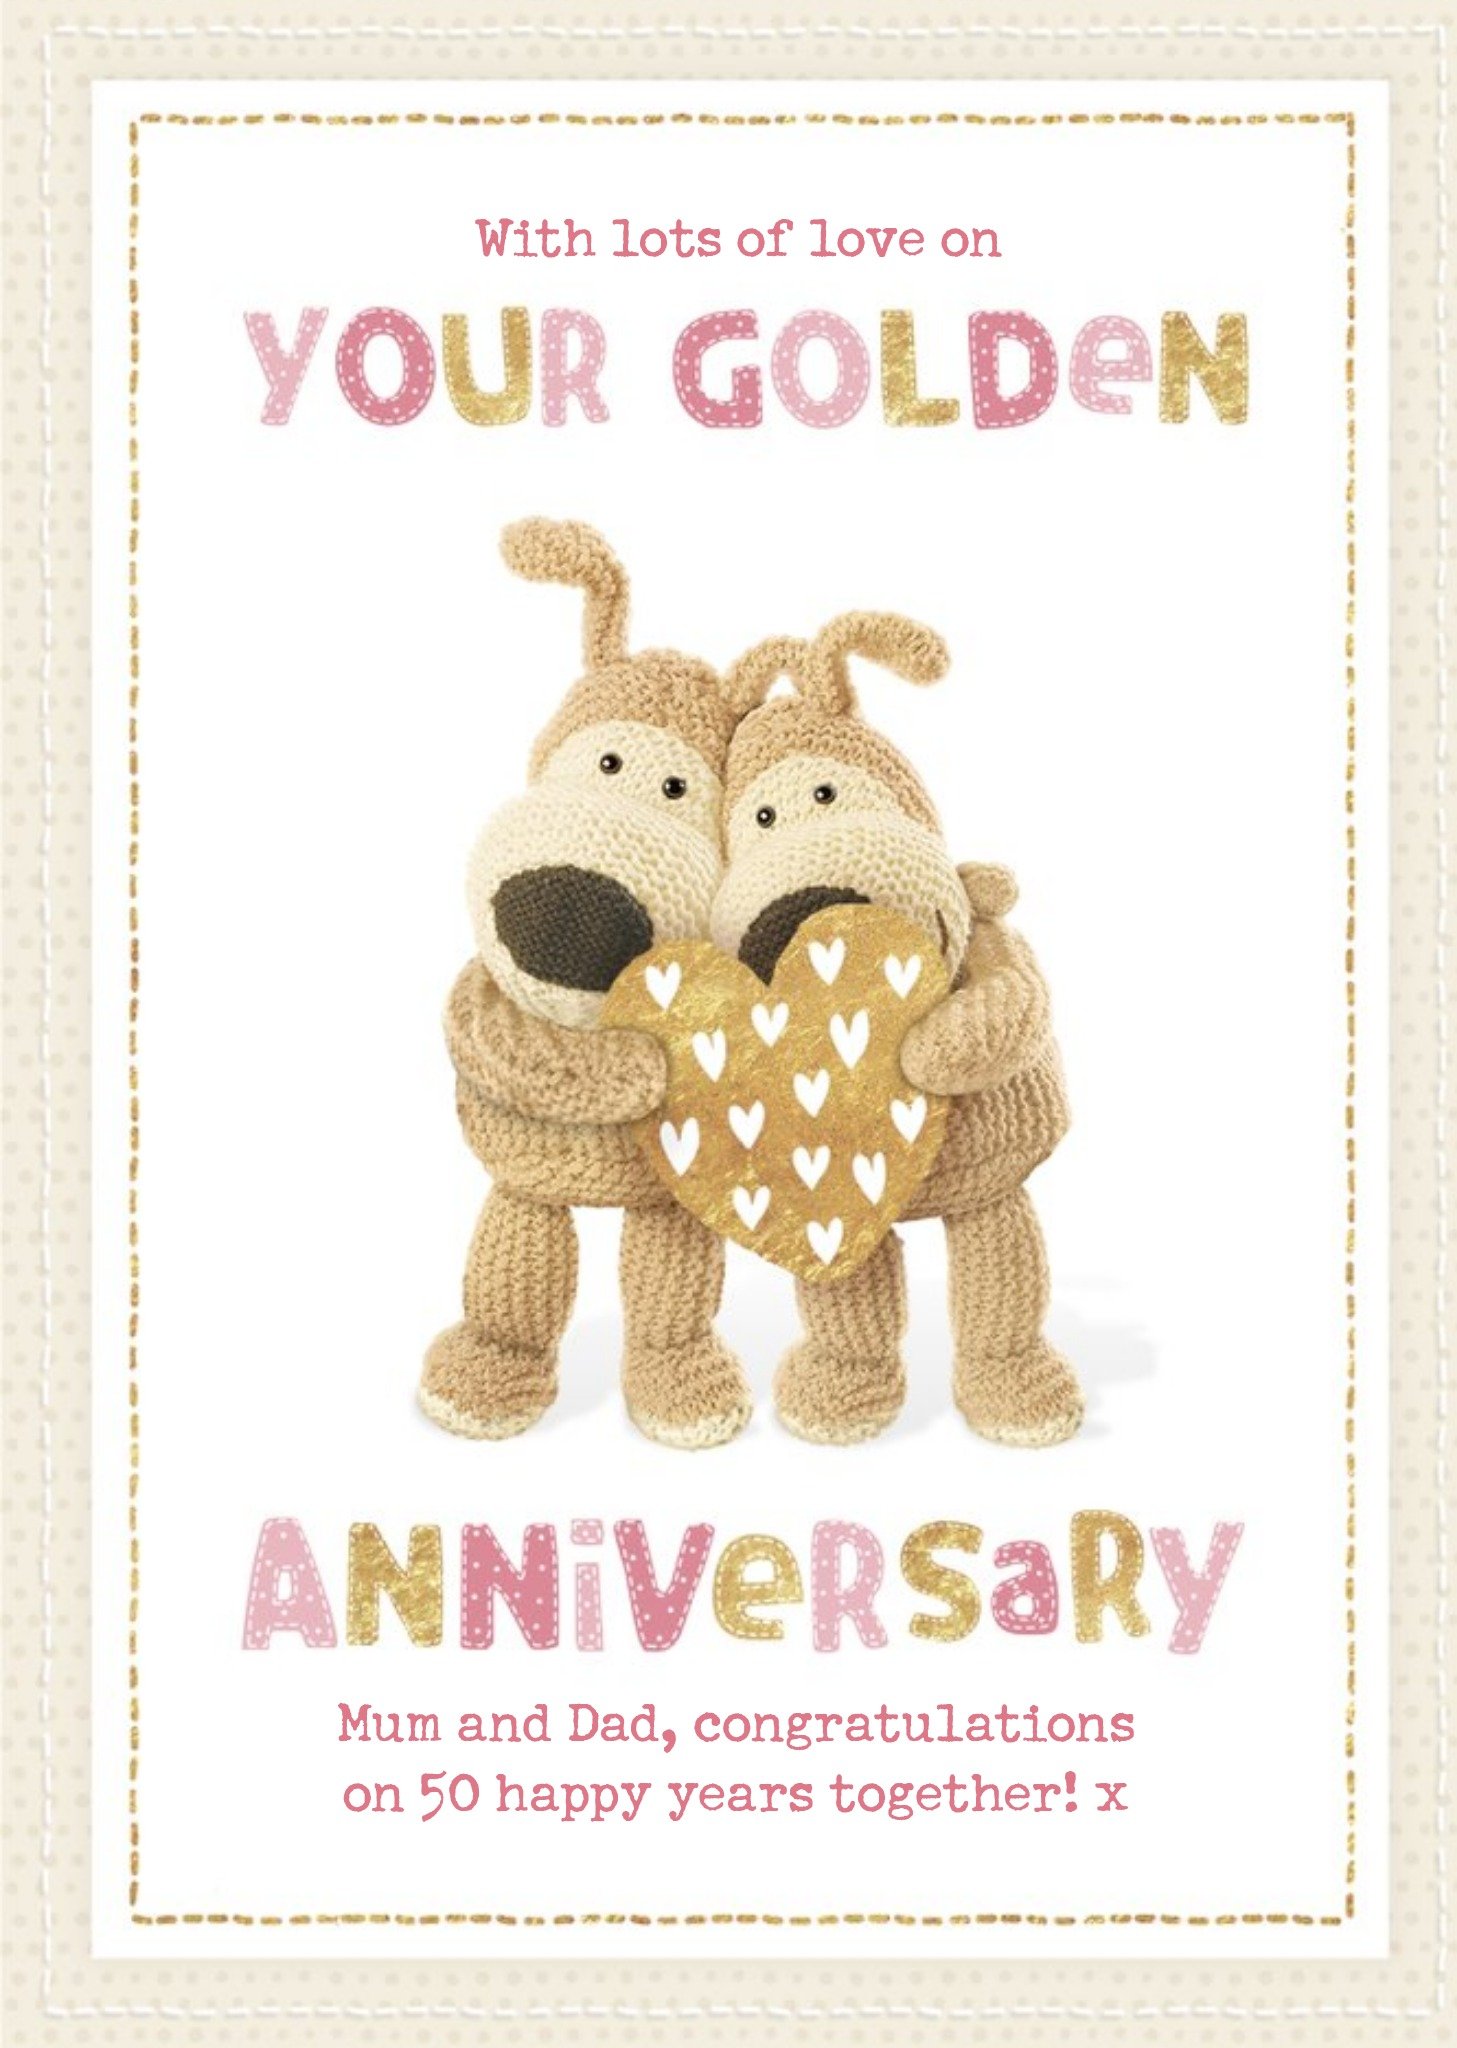 Boofle Cute Sentimental 50th Golden Anniversary Card For Mum And Dad, Large